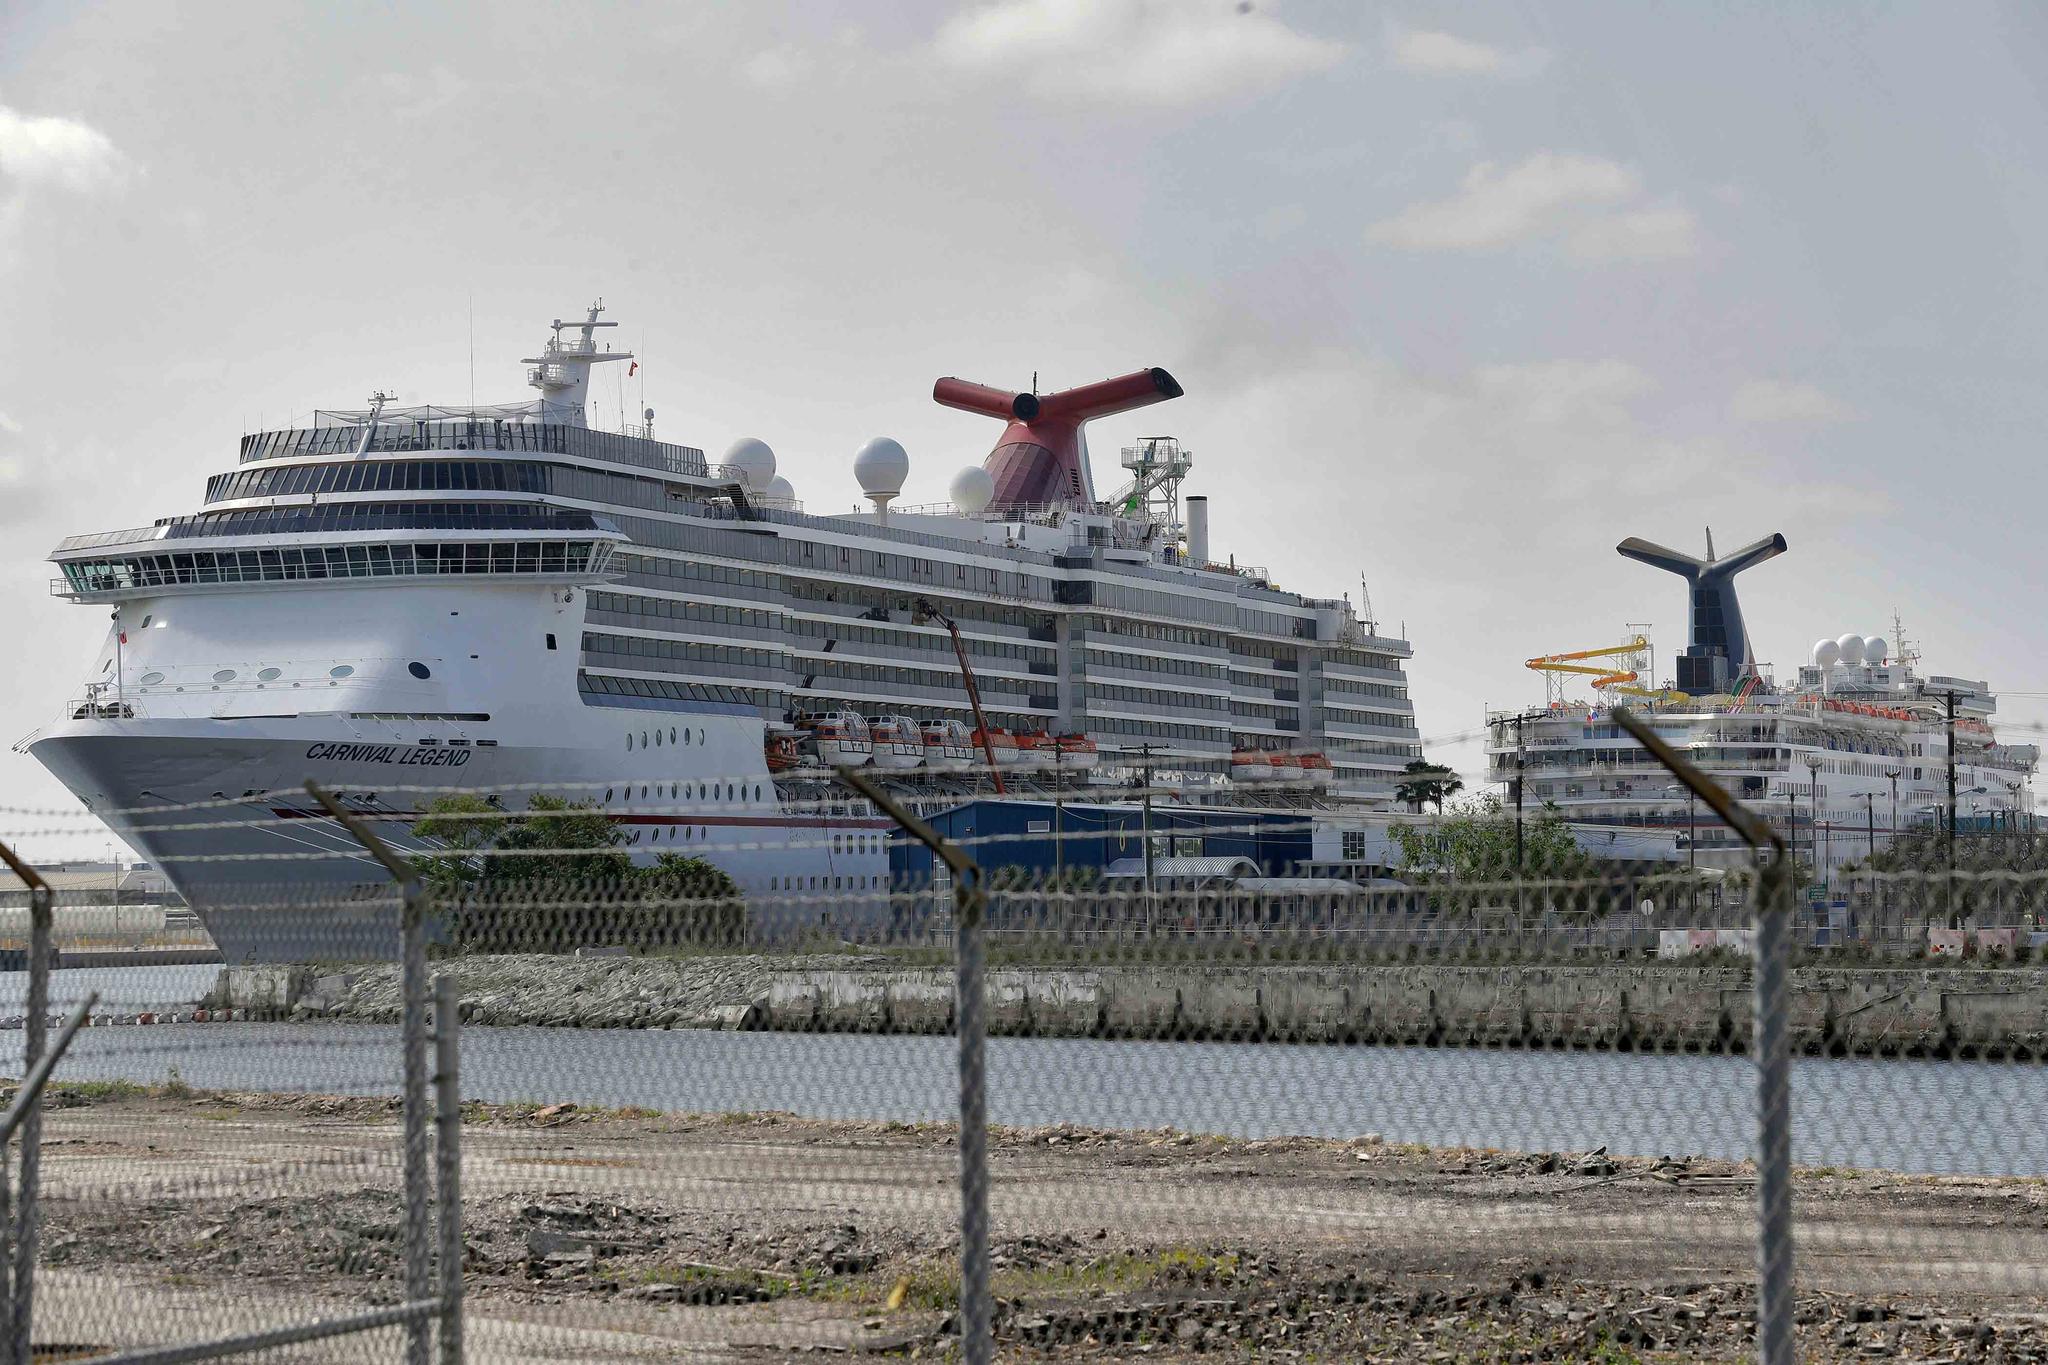 Carnival Cruise ships are docked at the Port of Tampa in Tampa, Fla.